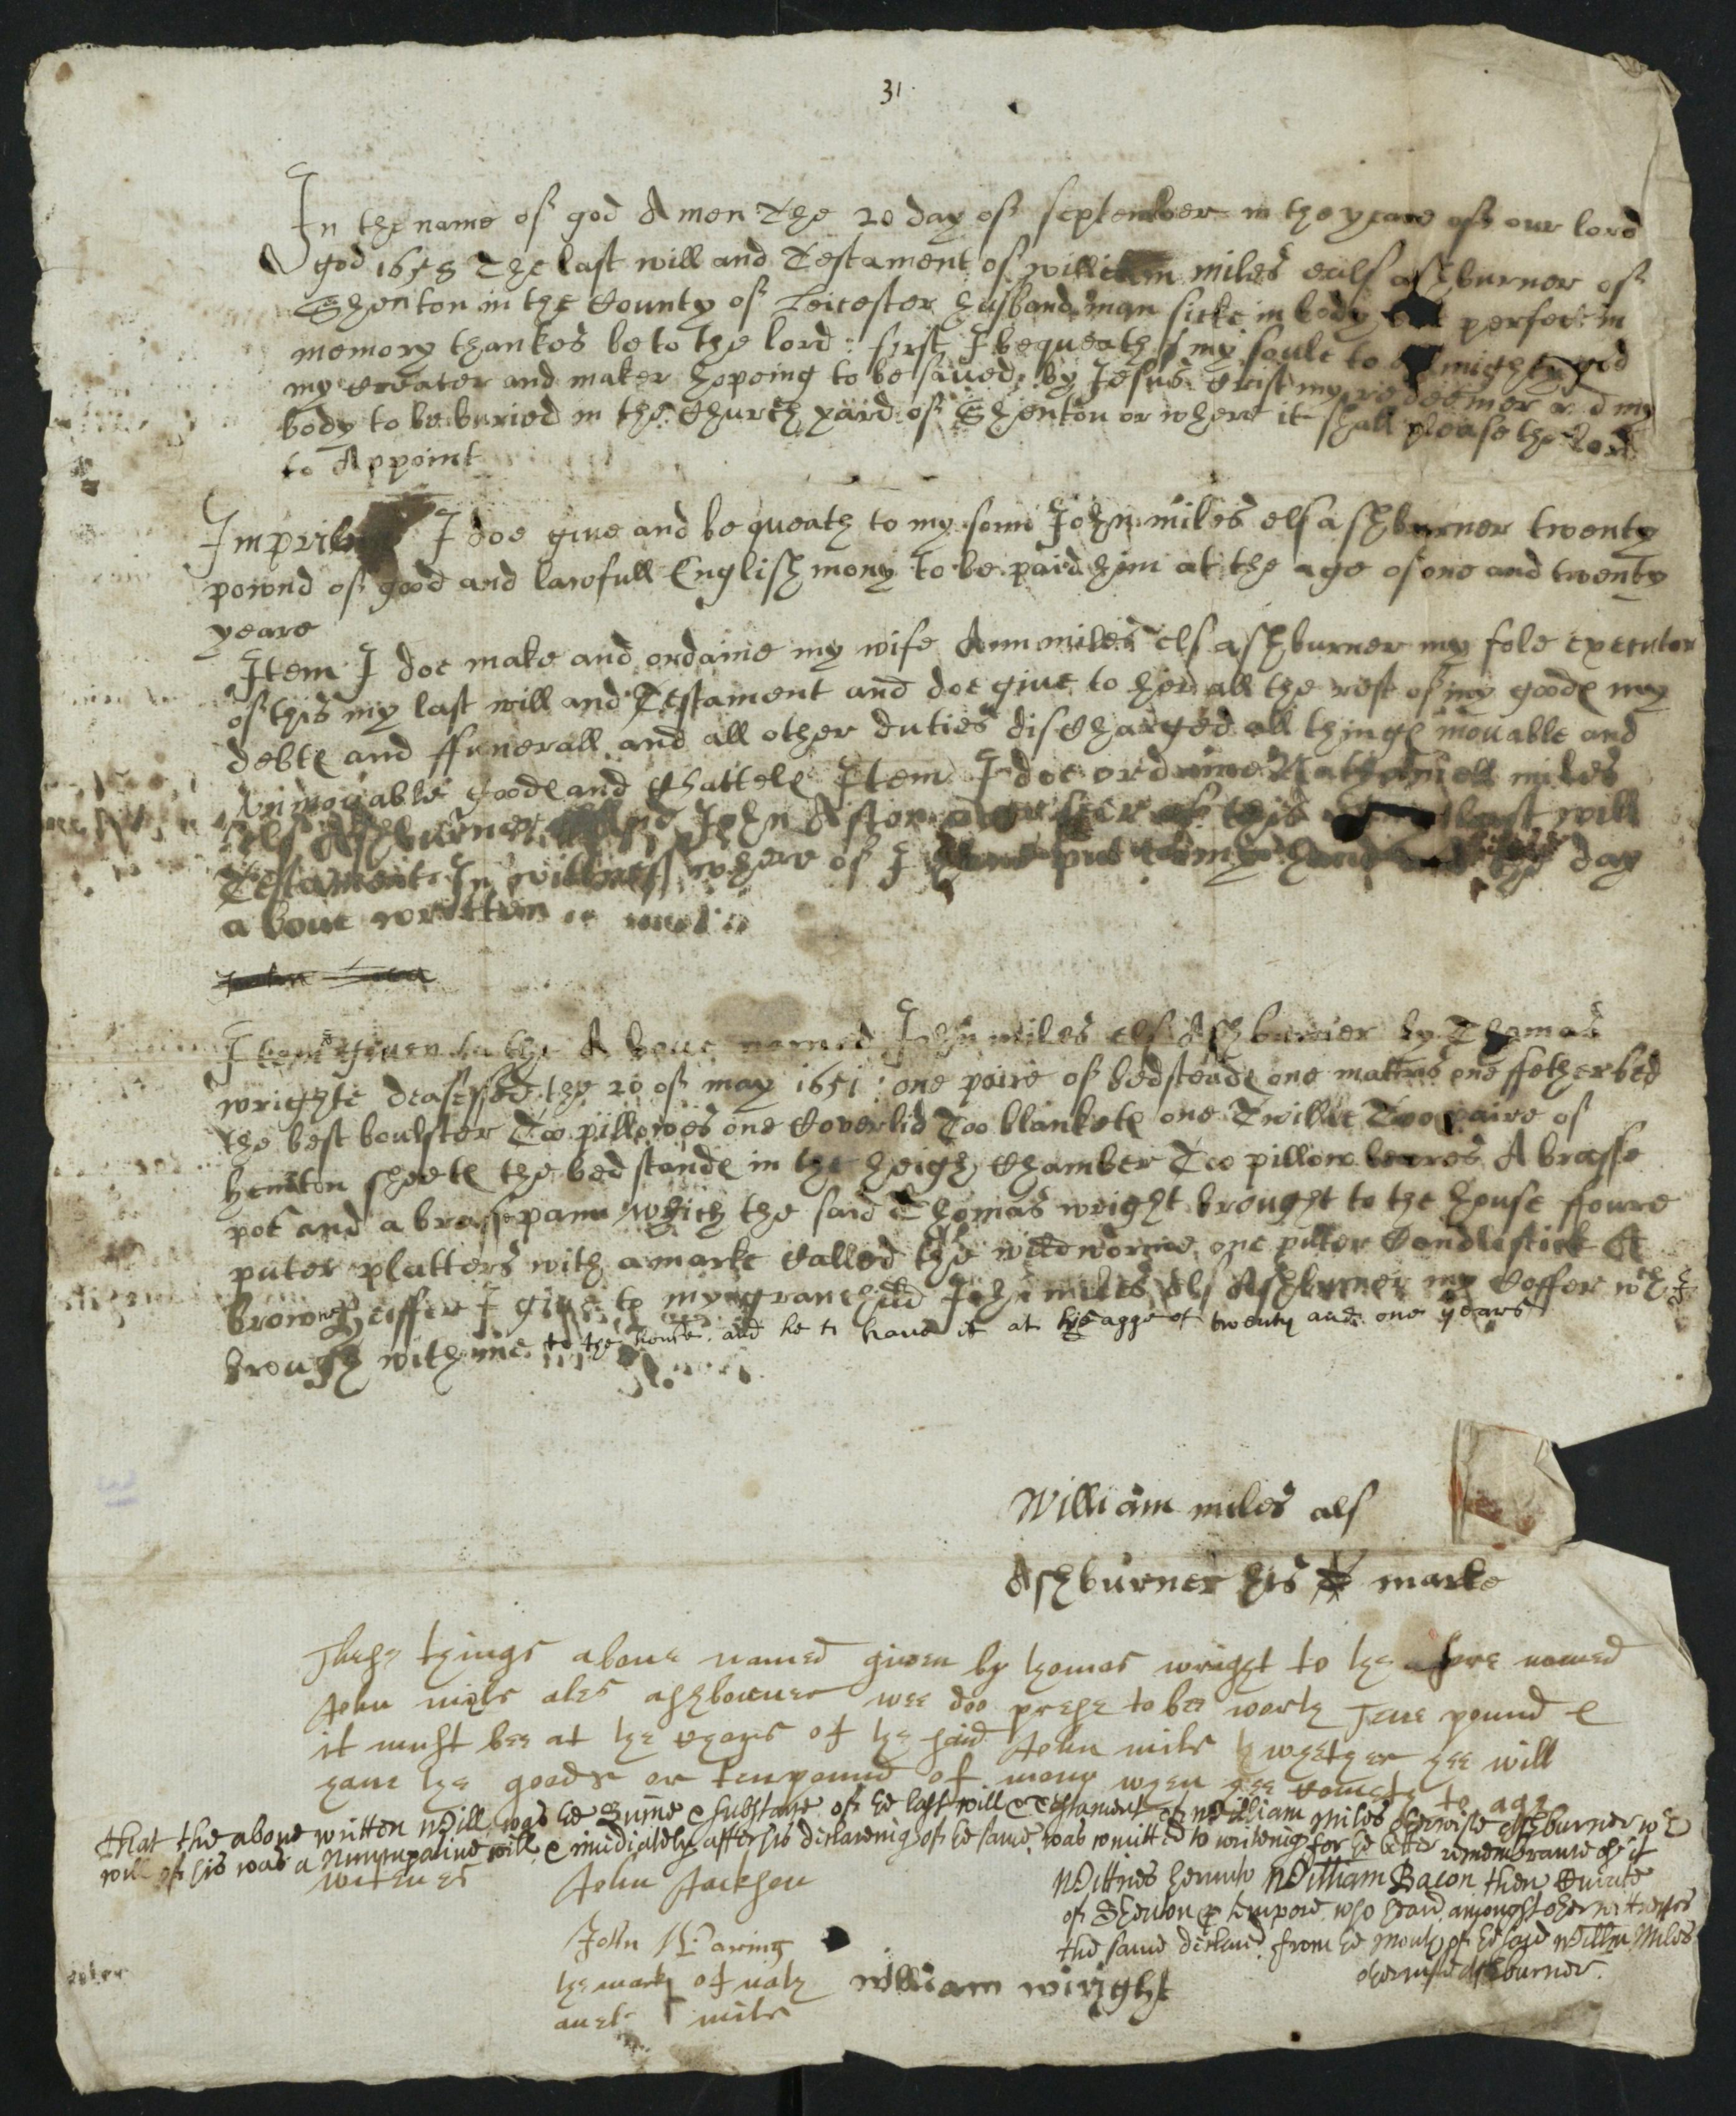 William's last will and testament of 1658